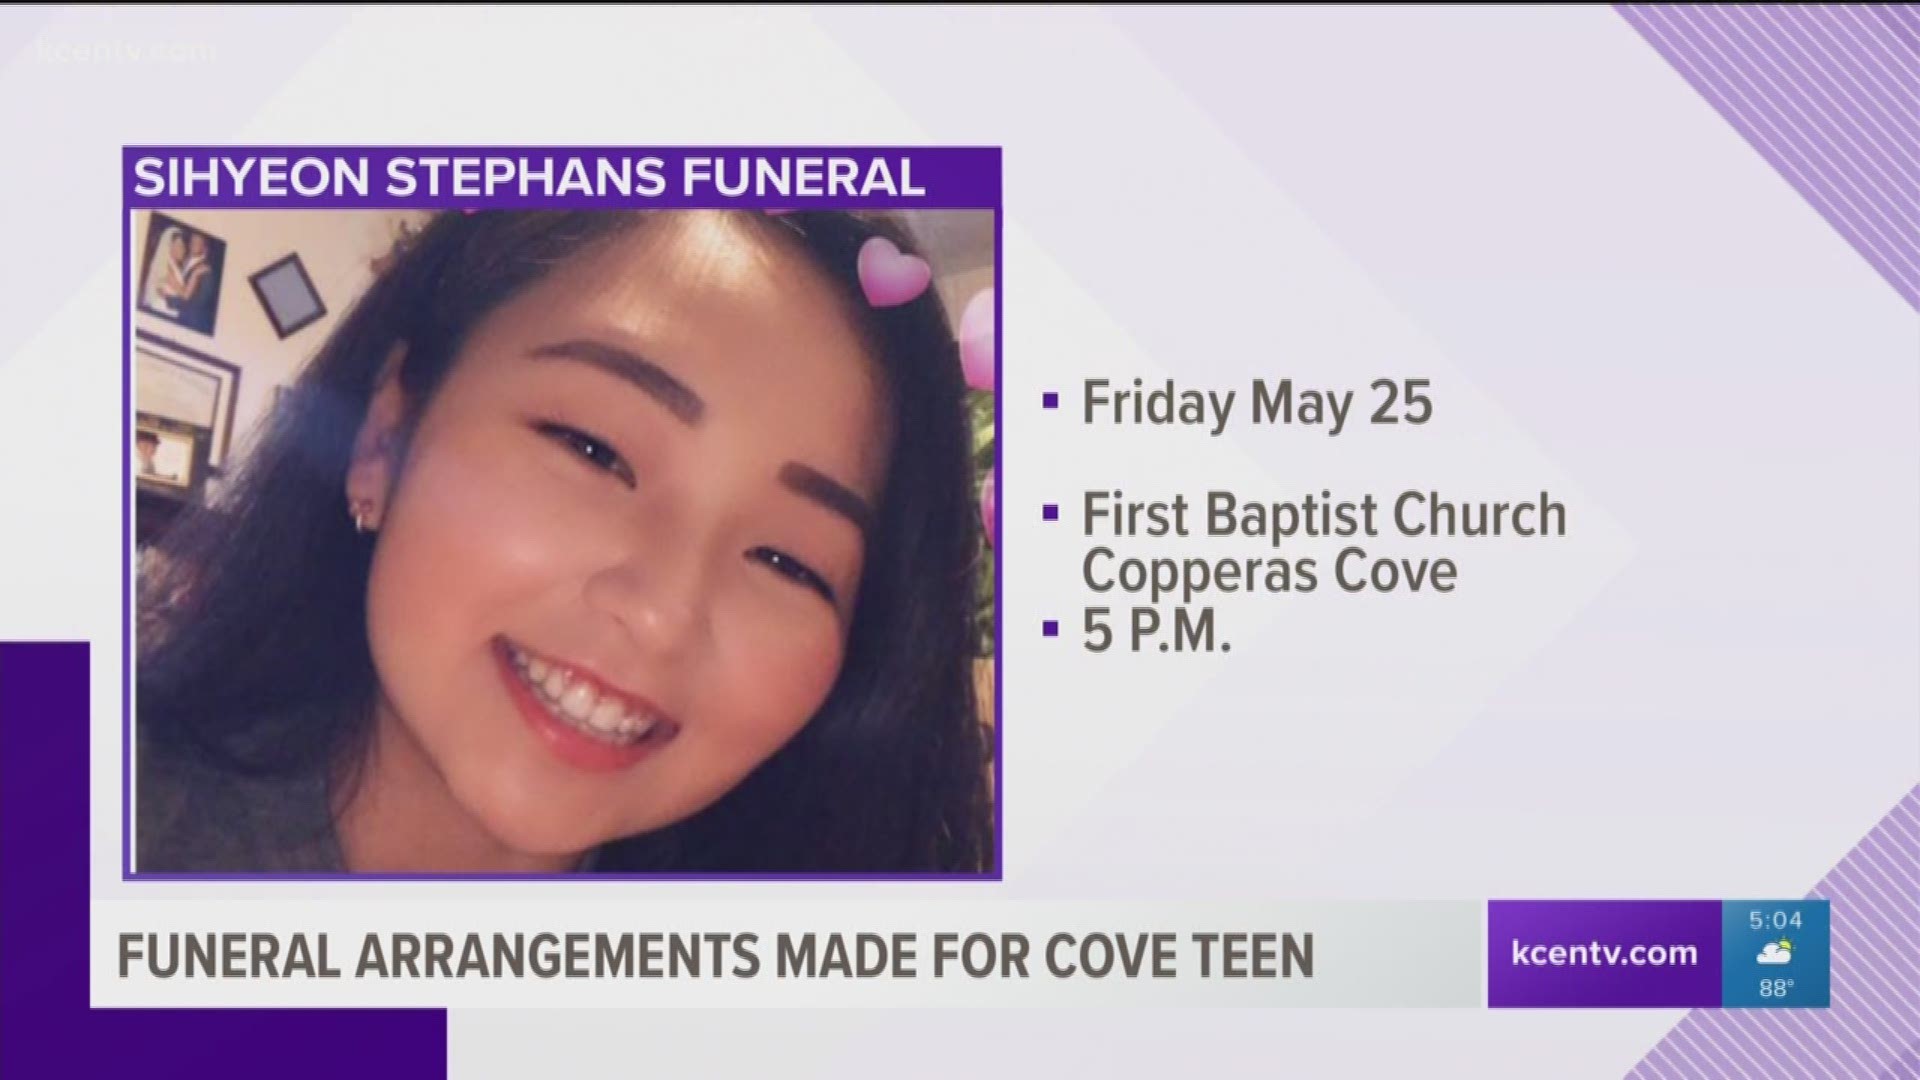 Funeral arrangements are set for the Copperas Cove teen who died in a car accident over the weekend. 